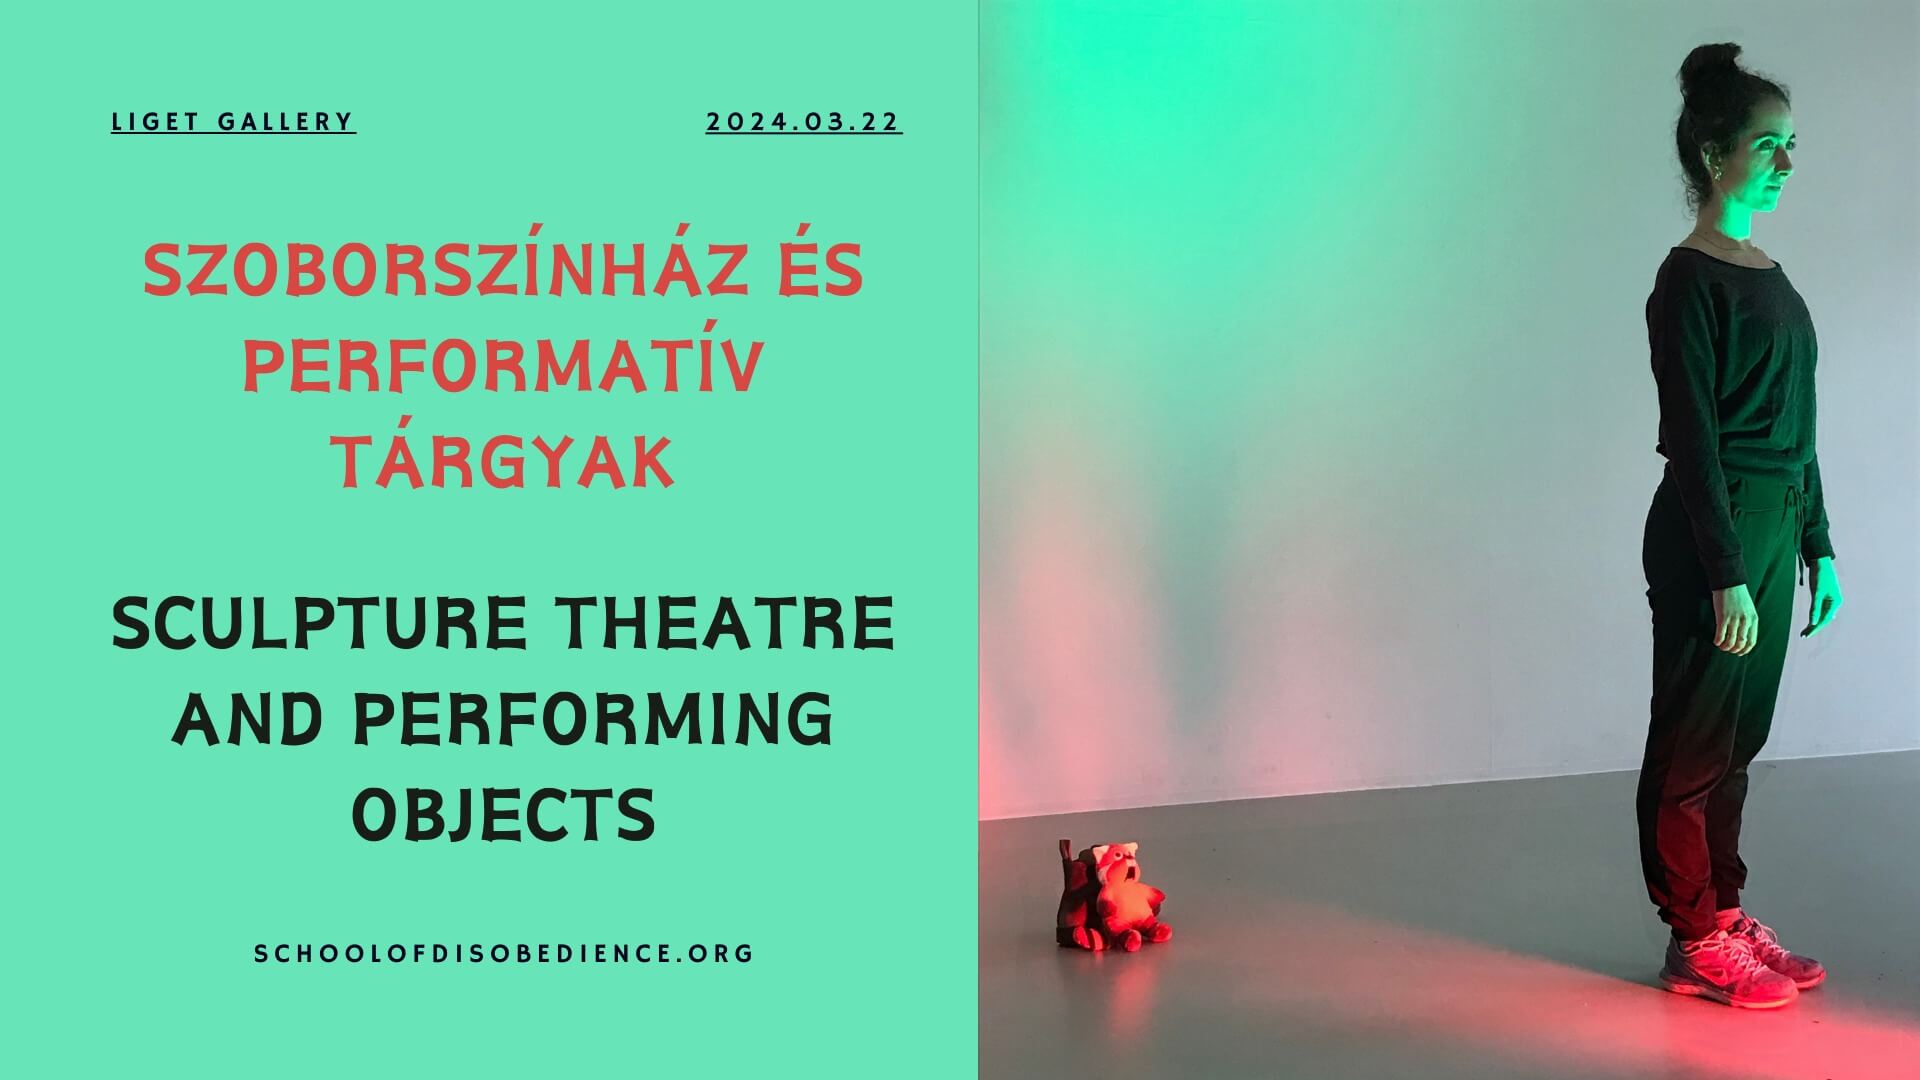 Performance Night, Liget Gallery Budapest, 22 March